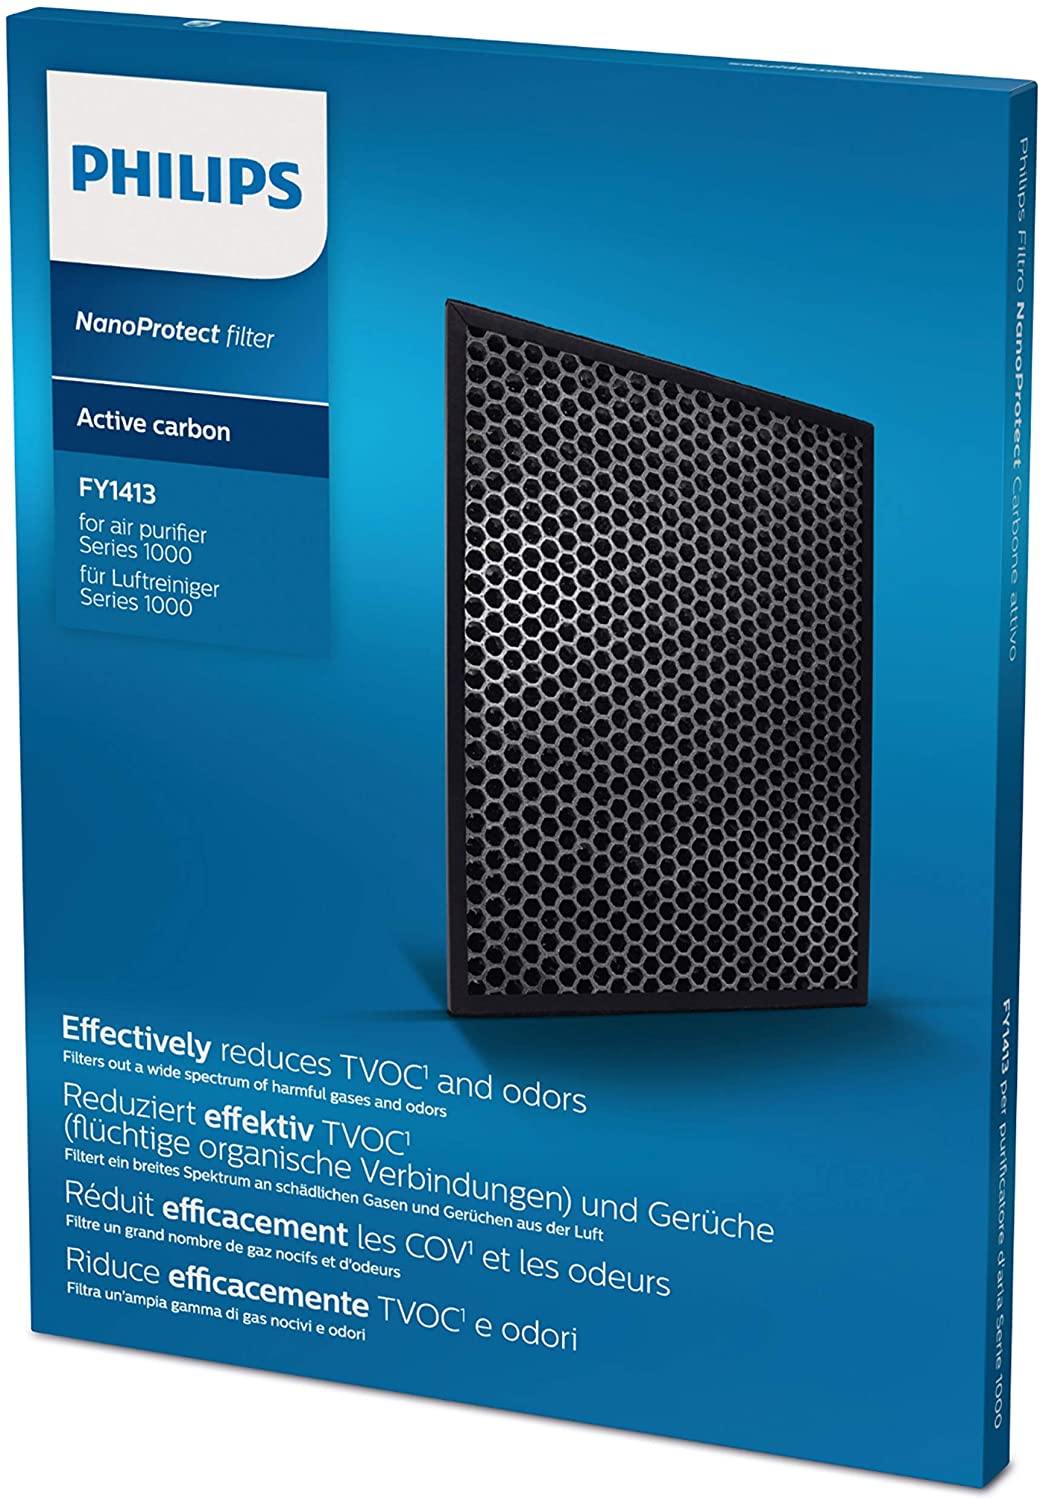 http://content.electromall.net/Resources/Images/MigratedData/philips-air-purifier-filter-fy1413-30-nano-protect-filter-active-carbon-2.jpg